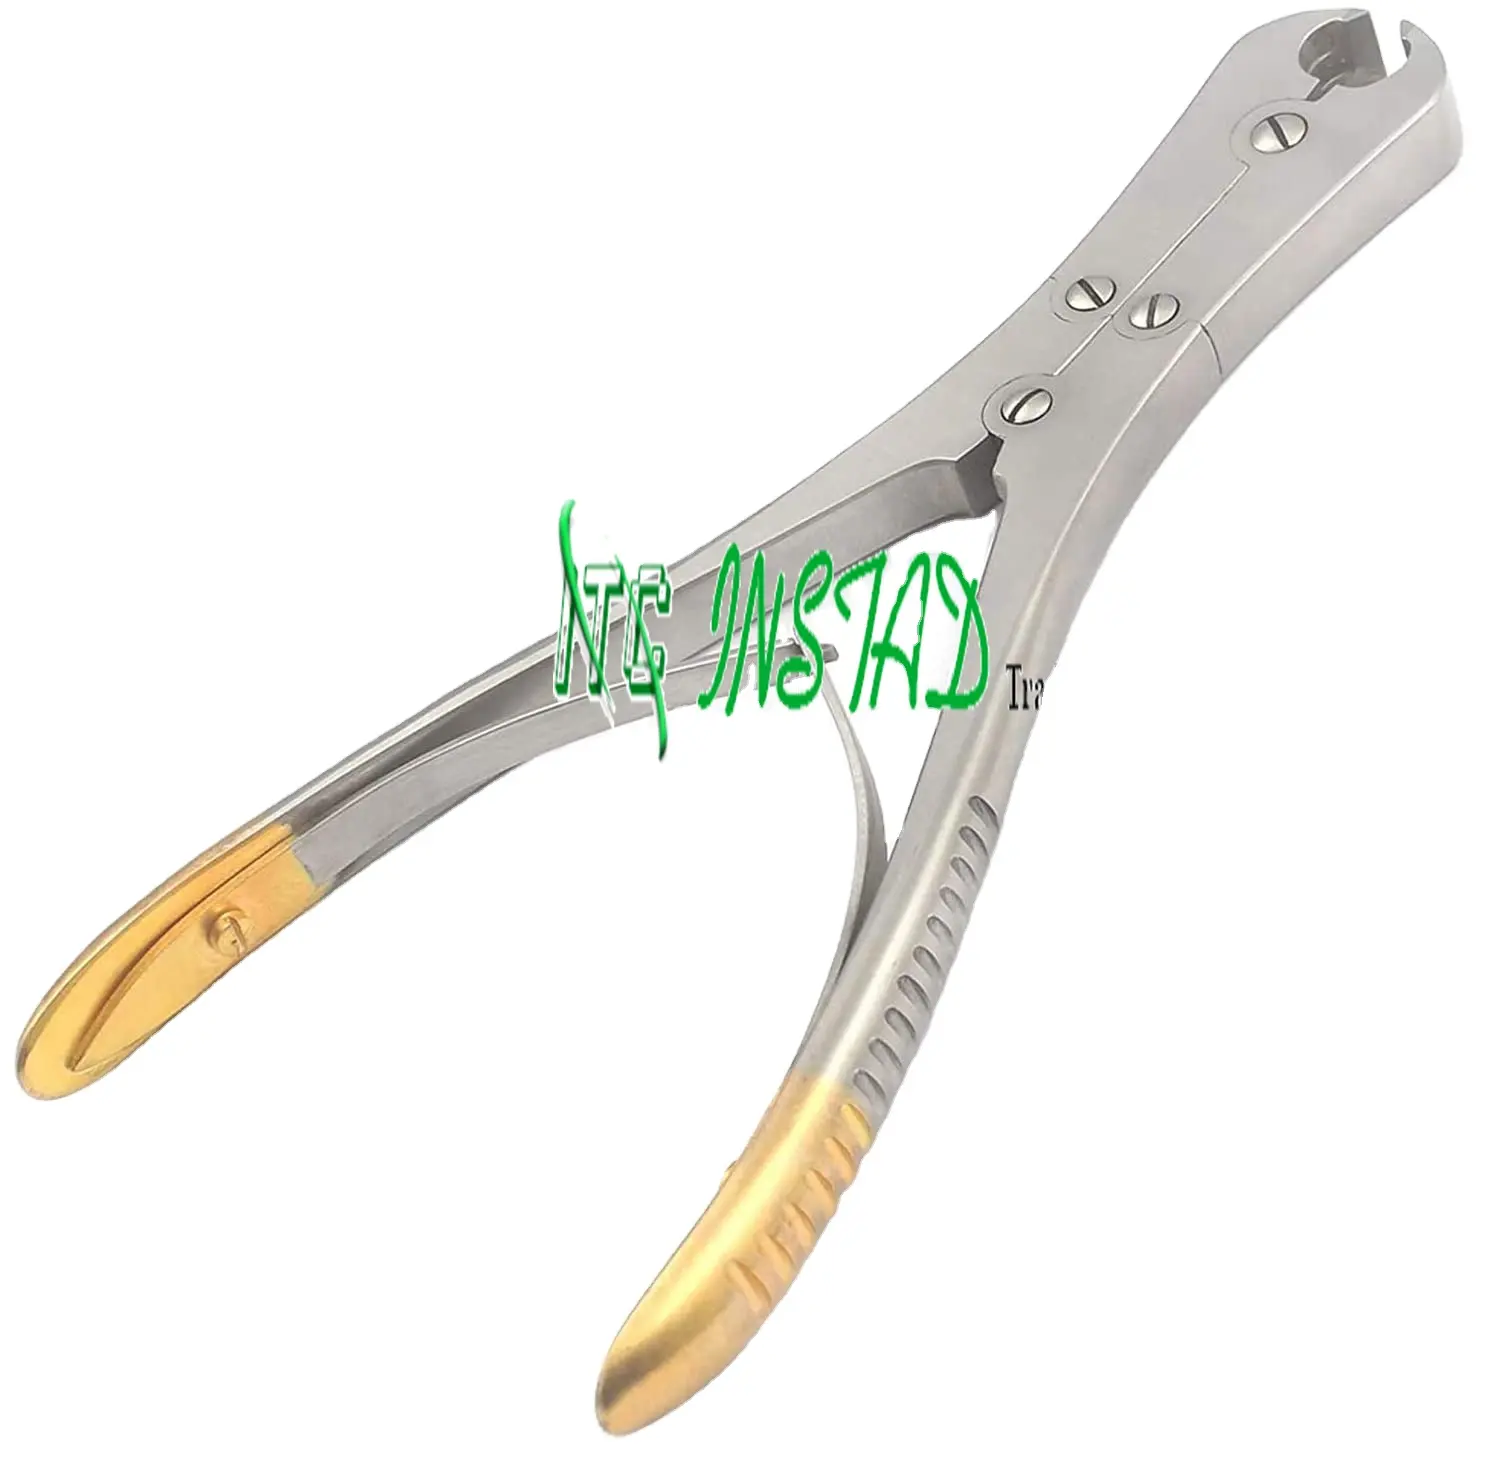 GS Tc Cns Front & Side Pin Wire Cutter 7inch Orthopedic Instruments